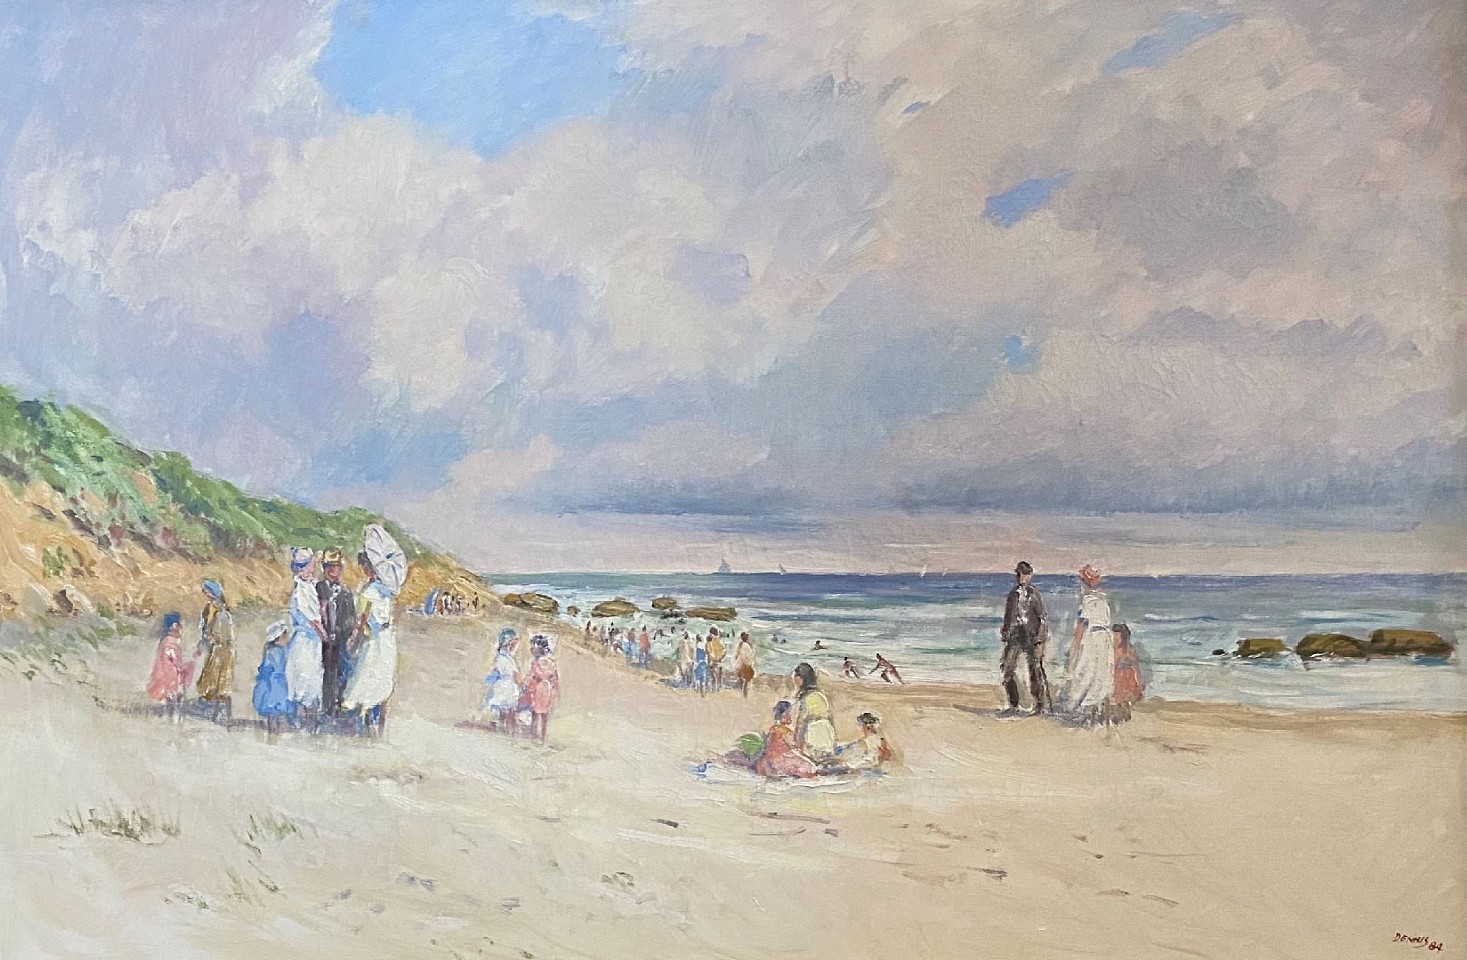 Roger Dennis, Perfect Day at the Beach
oil on canvas, 24"" x 36""
UC 0718
$5,500